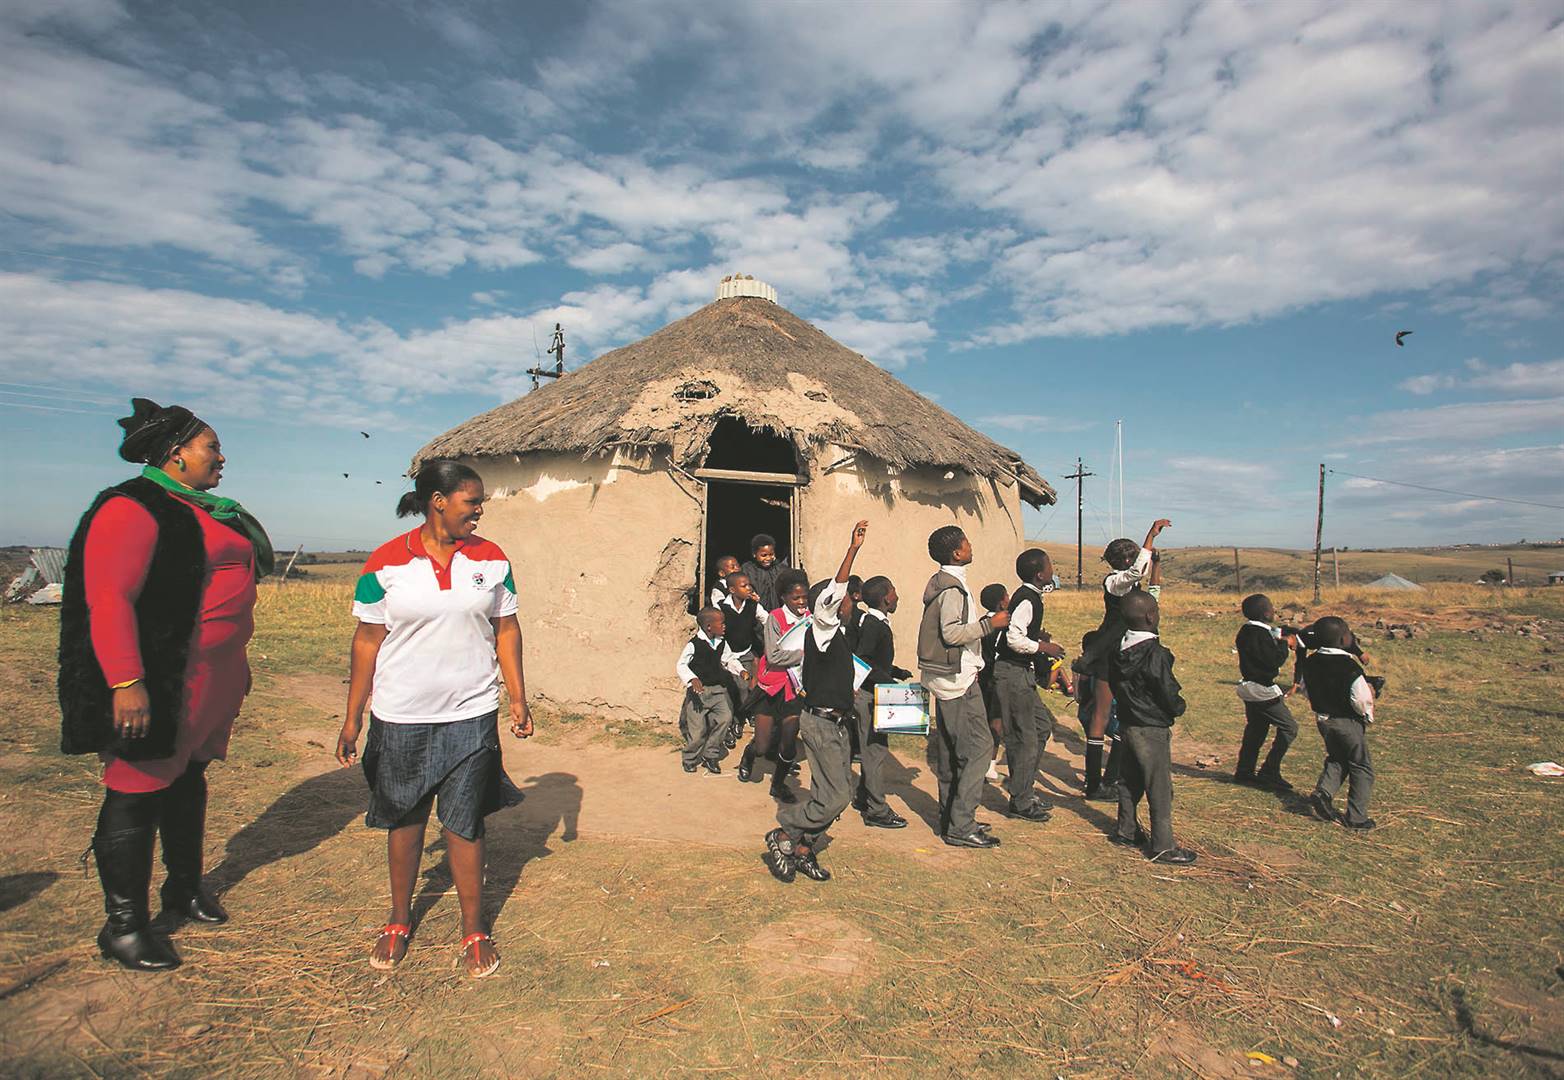 In this 2015 picture, at Gwabe Primary School in Willowvale, Eastern Cape, 86 pupils from Grade R to Grade 4 are forced to share one large mud building as a classroom. Others have to sit under trees to receive their education. The promises of democracy have clearly not arrived for many rural poor and they have had enough – they cannot wait another 25 years before they benefit. Picture: Gallo Images /Sunday Times/ Simphiwe Nkwali